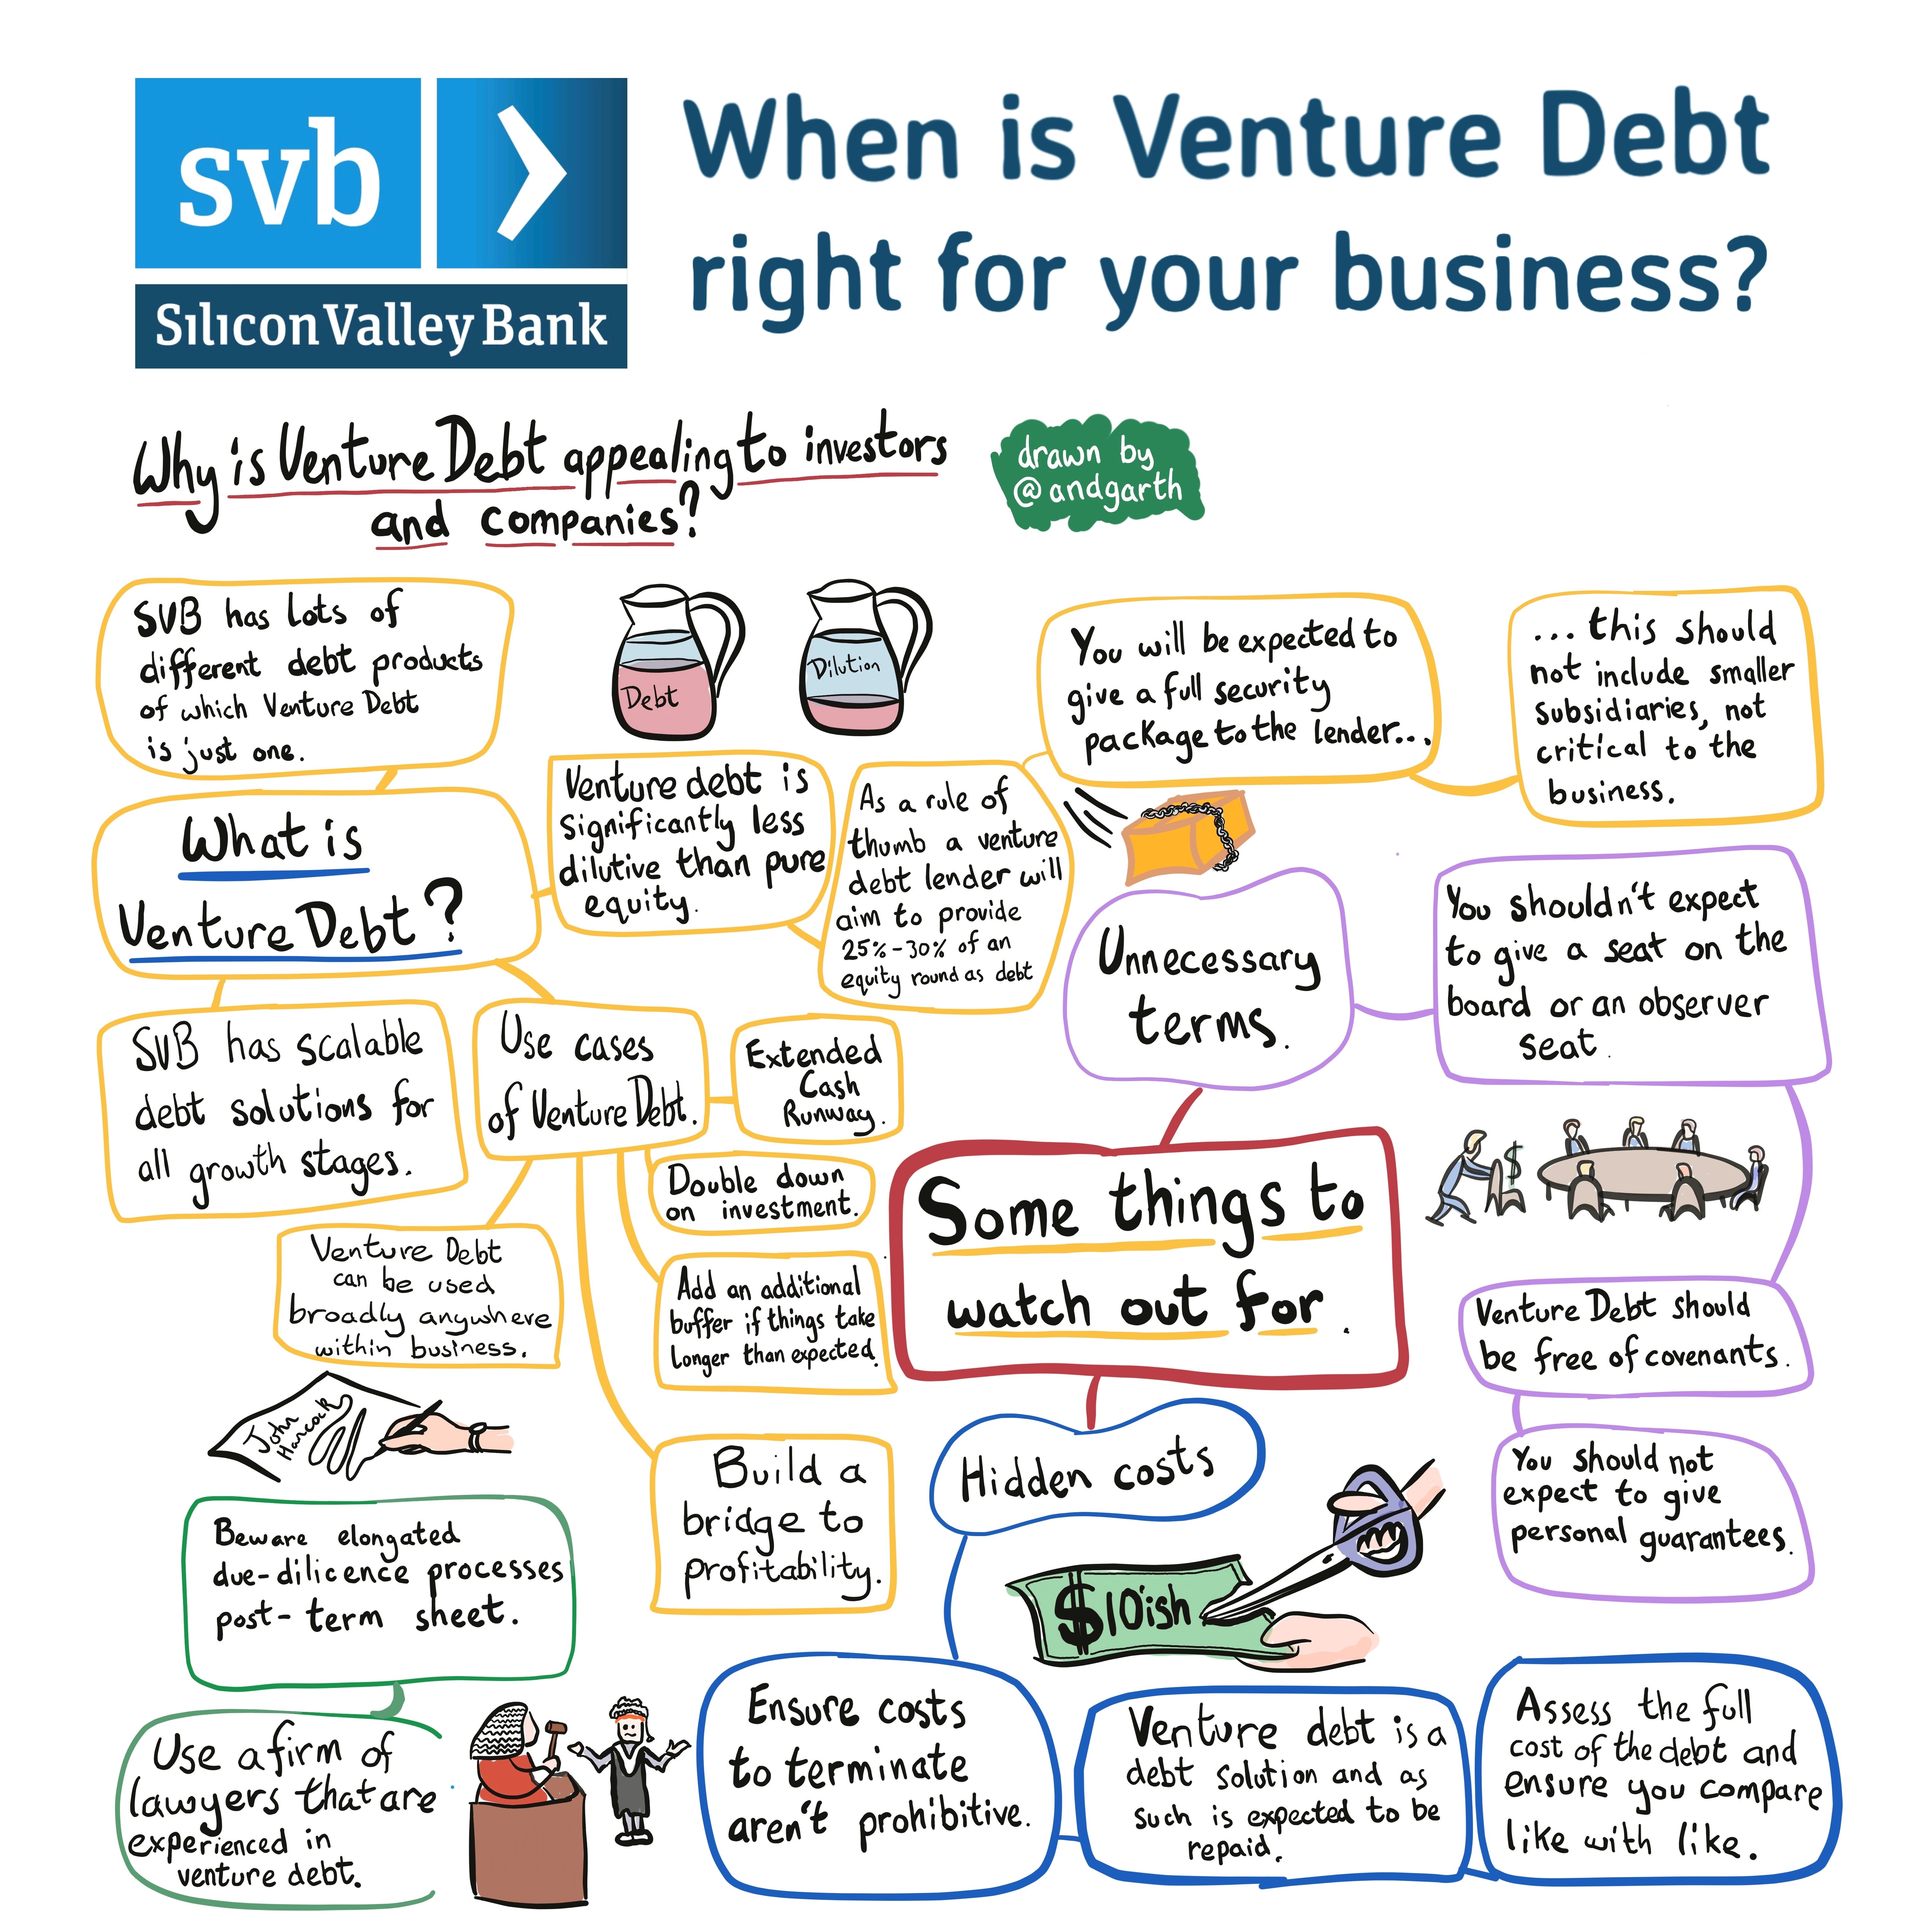 When to pay off venture debt?